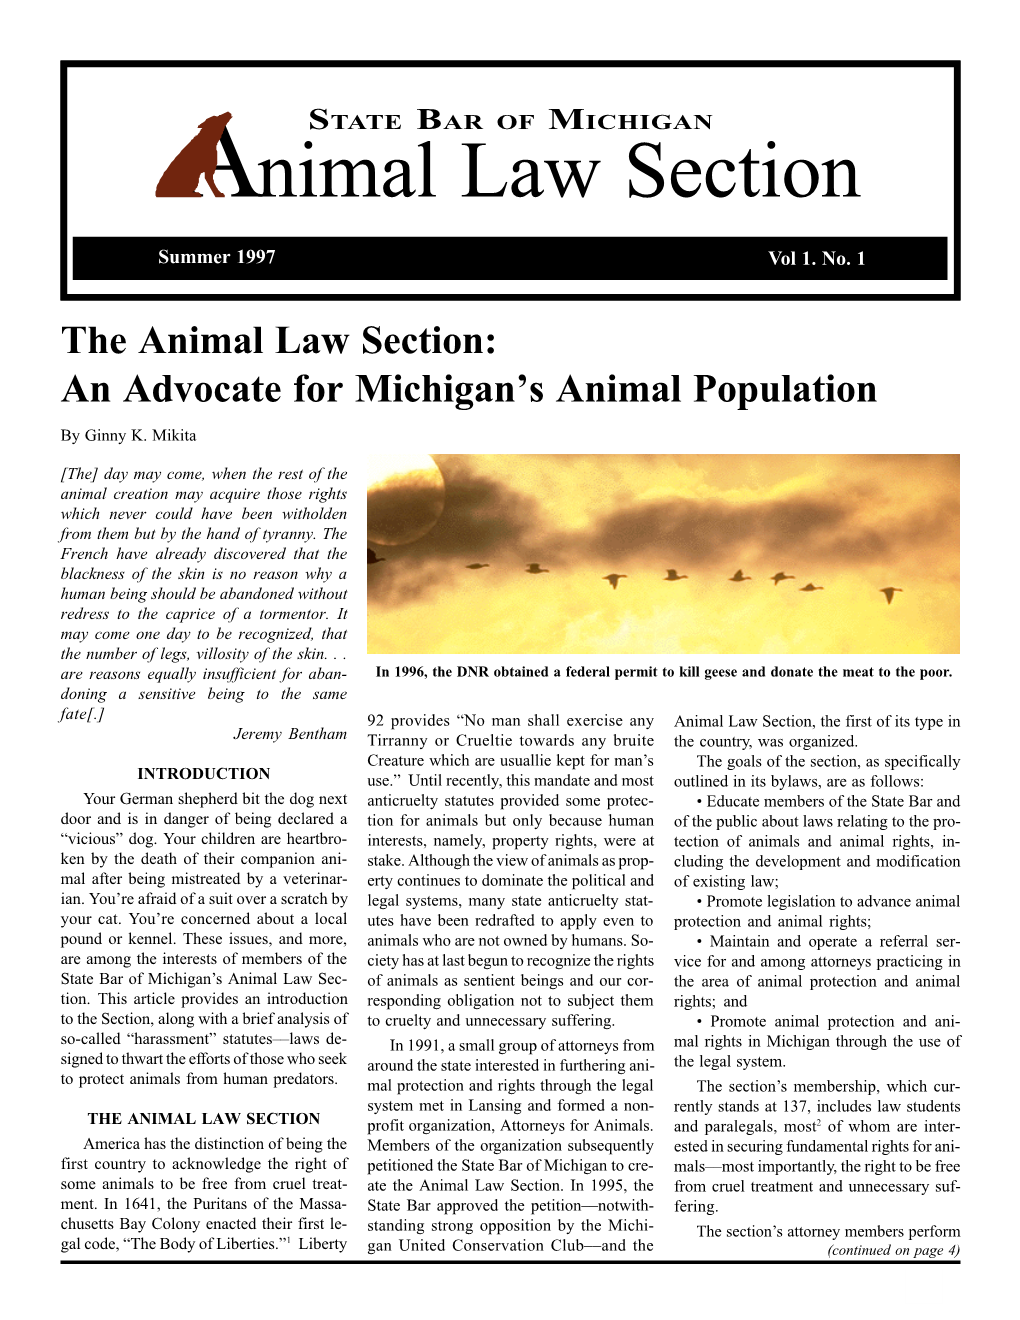 Animal Law Section